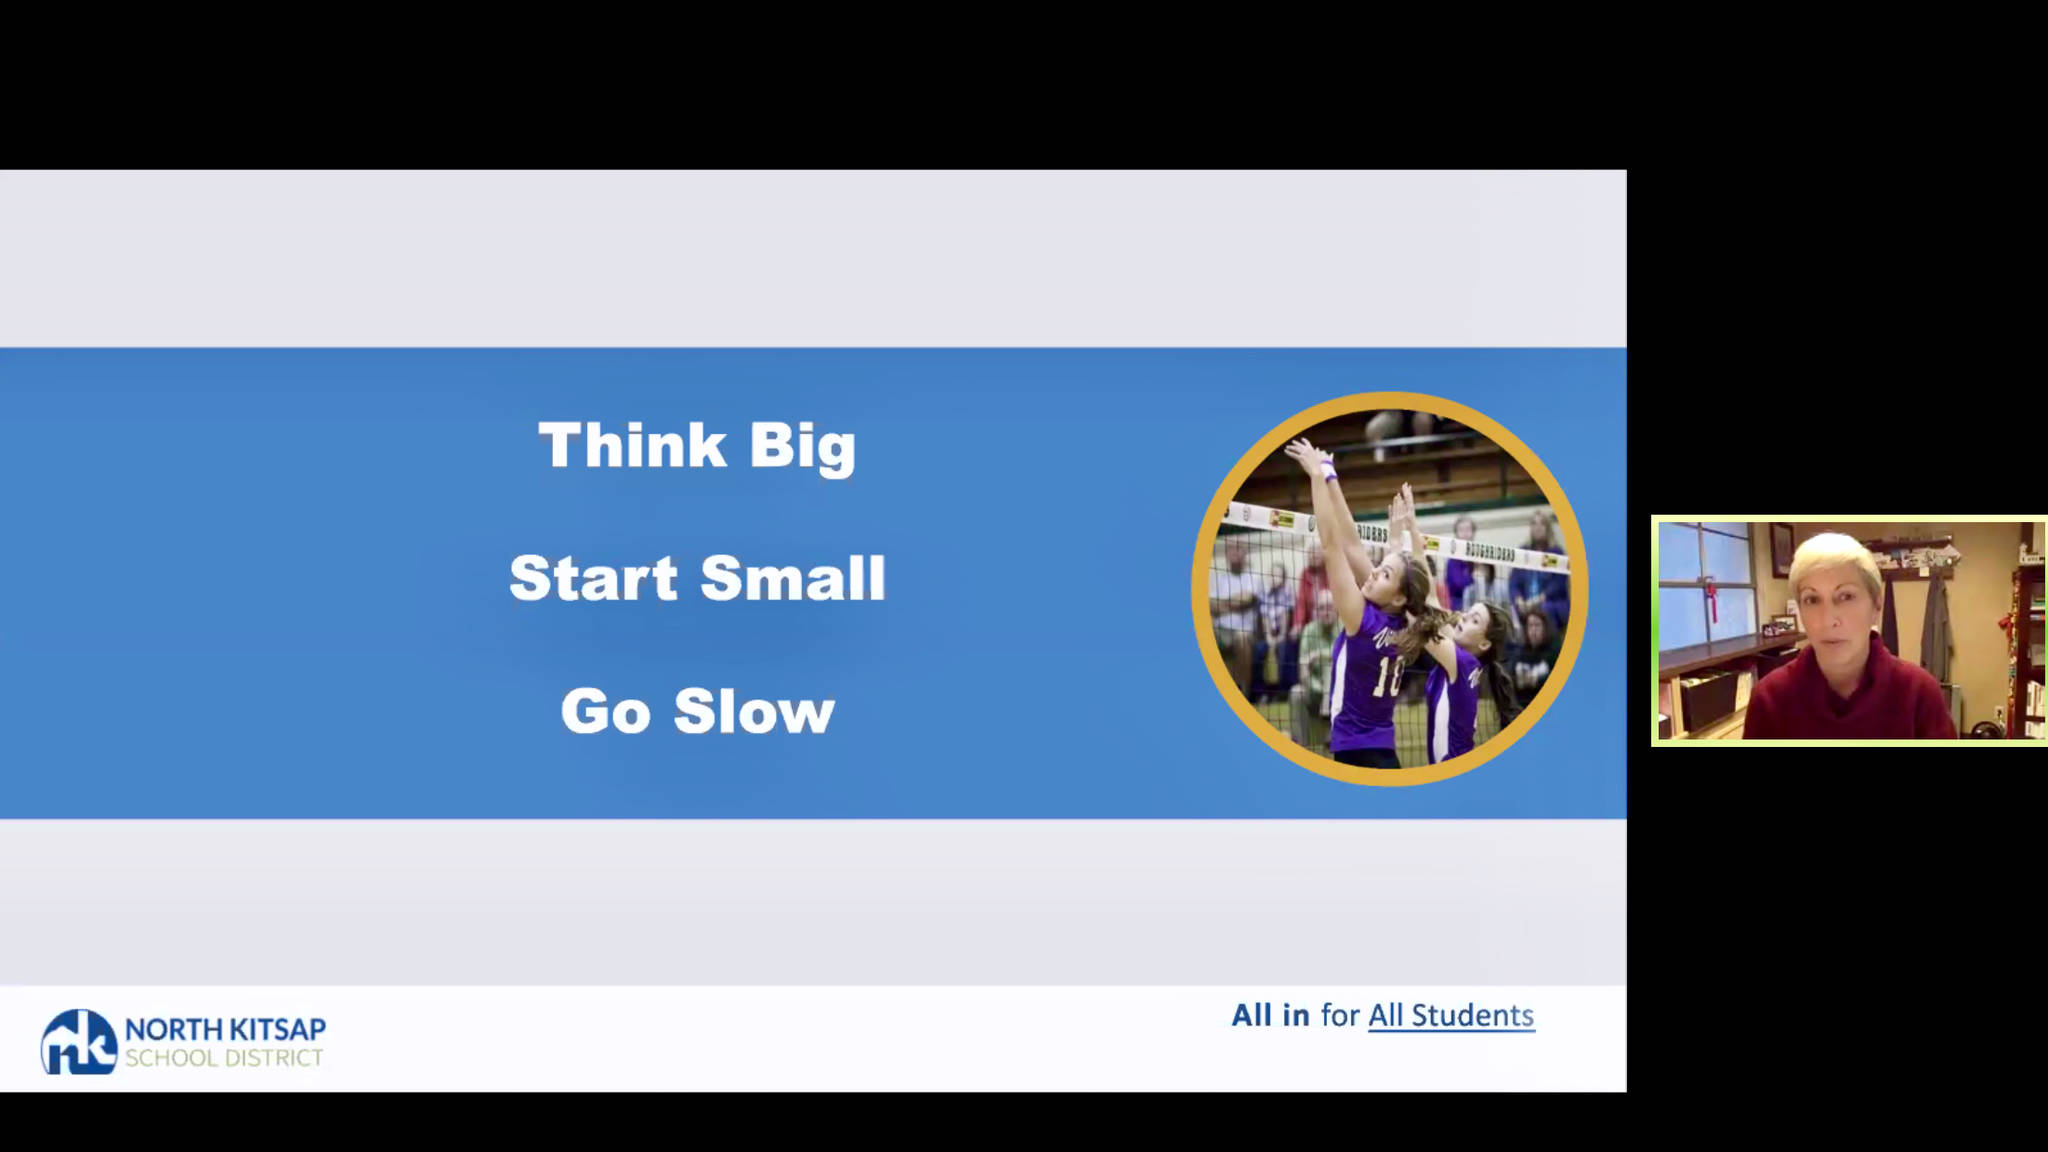 "Think big, start small, go slow," has become North Kitsap School Districts Mantra when it comes to bringing kids back to school.